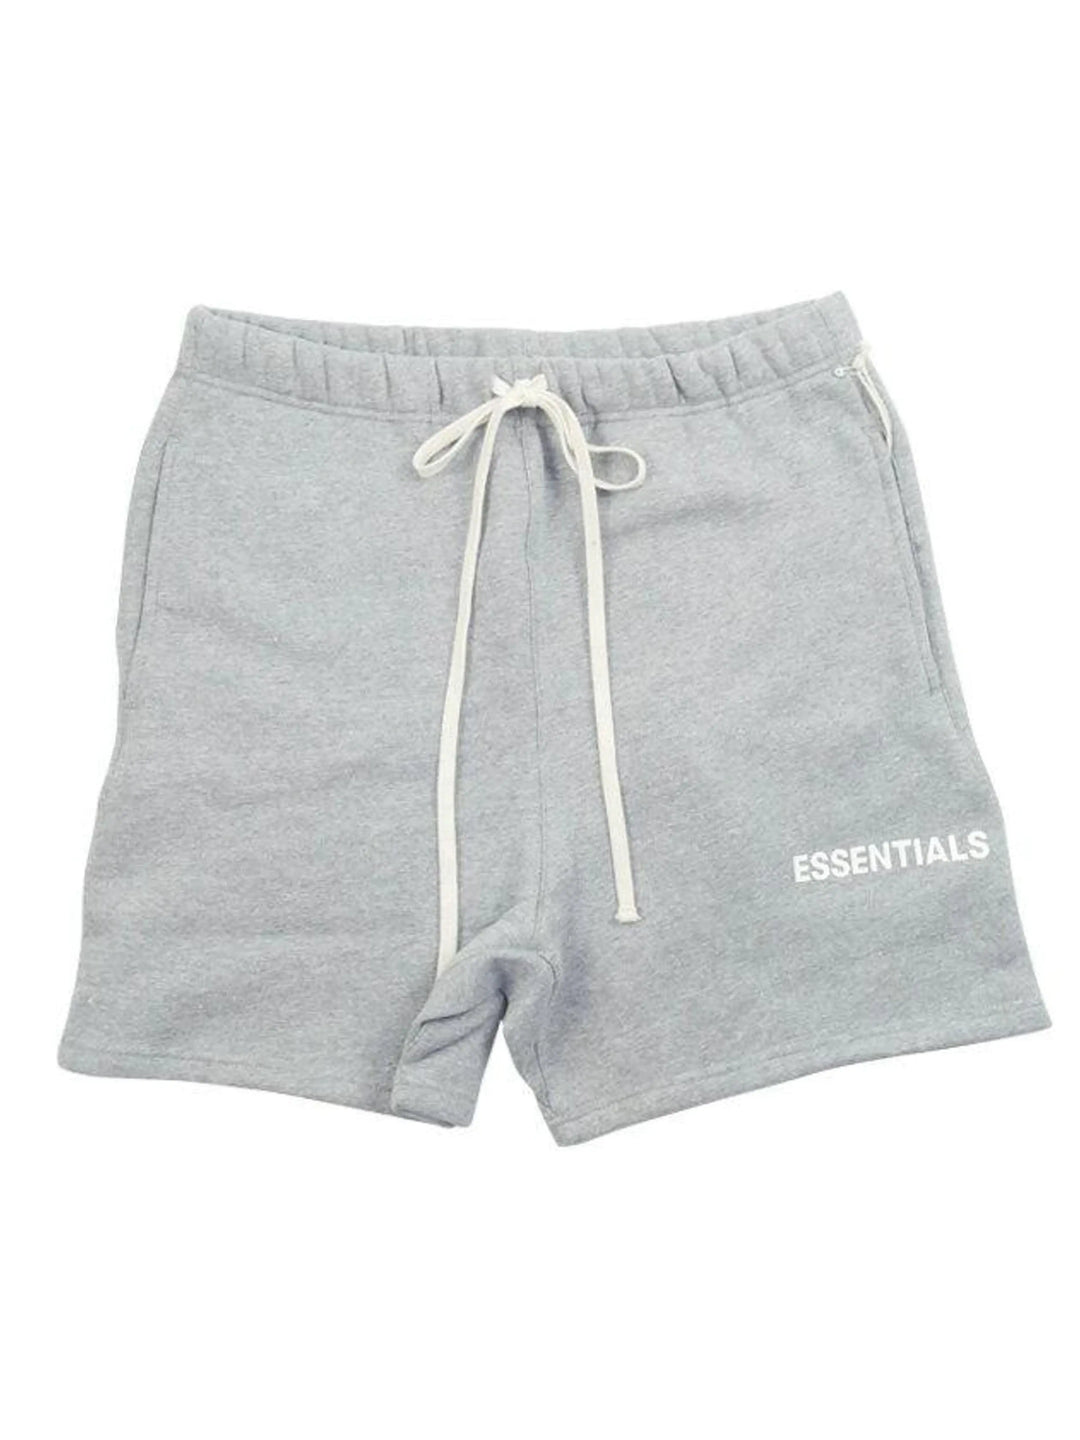 Fear of God Essentials Graphic Sweat (FW18) Shorts Grey/White Prior